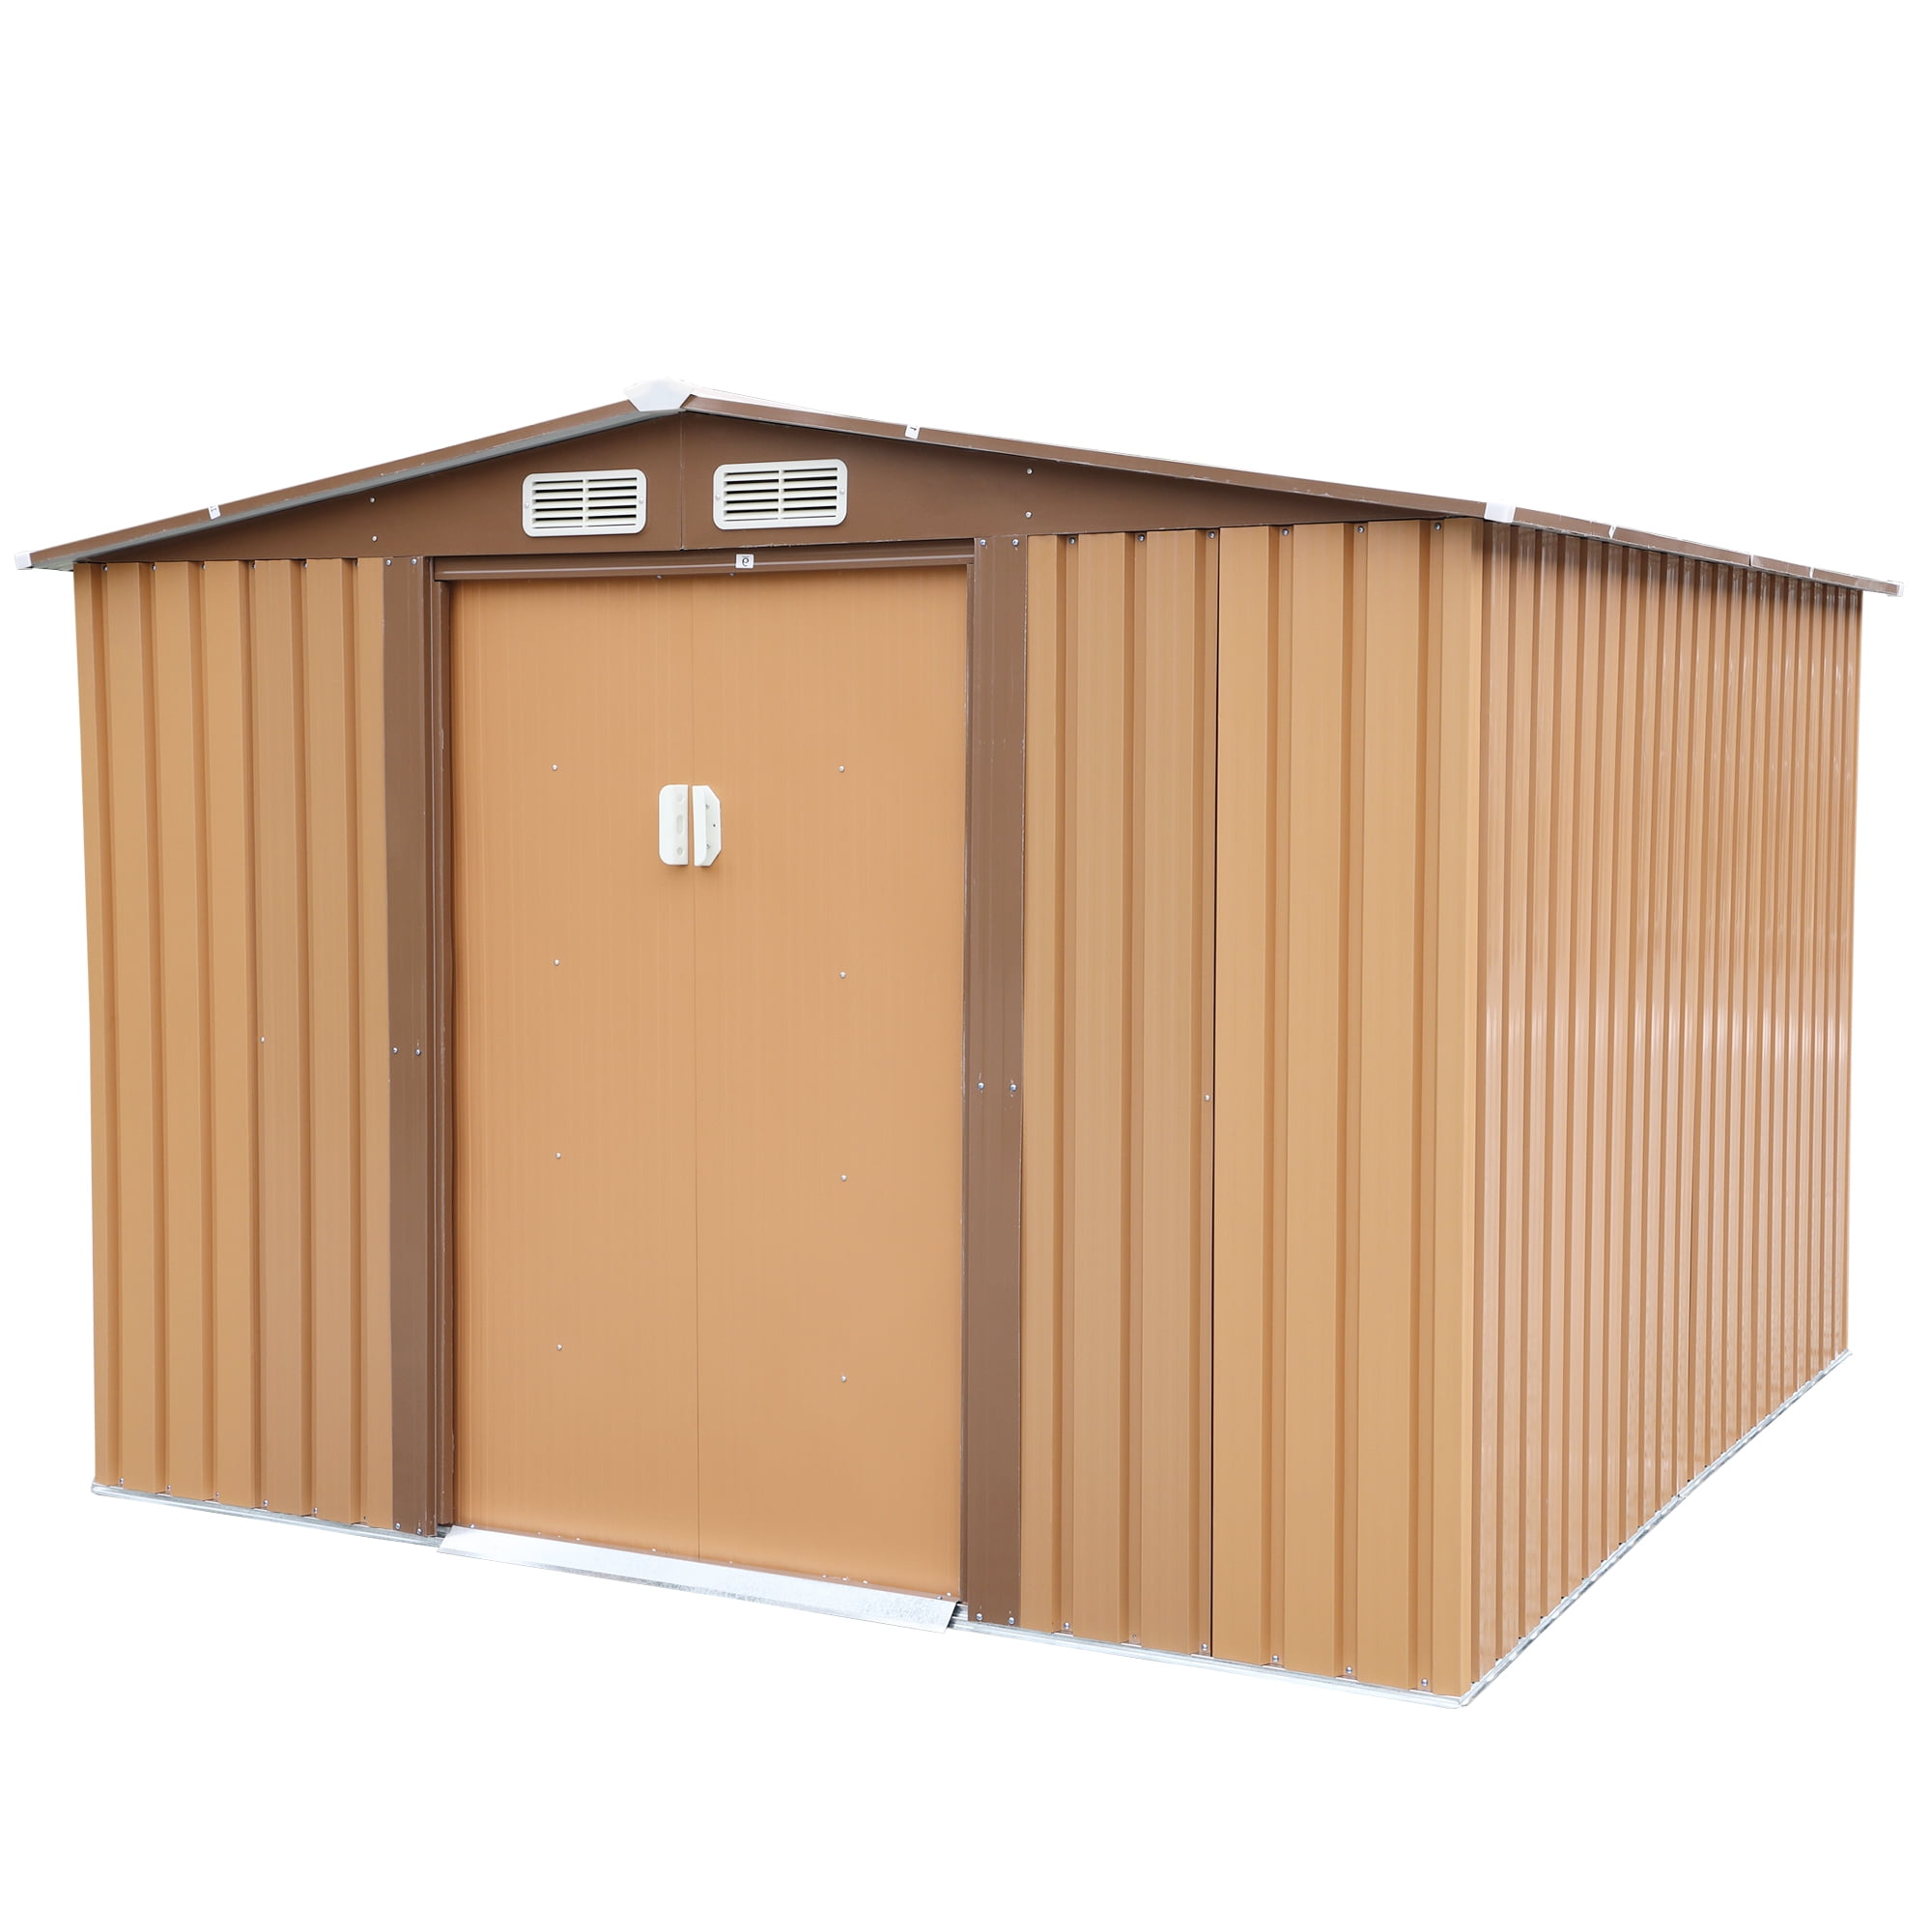 Details about   Portable Storage Shed Motorcycle Cover Tool Lawnmower Shed 6x8x7.8' 